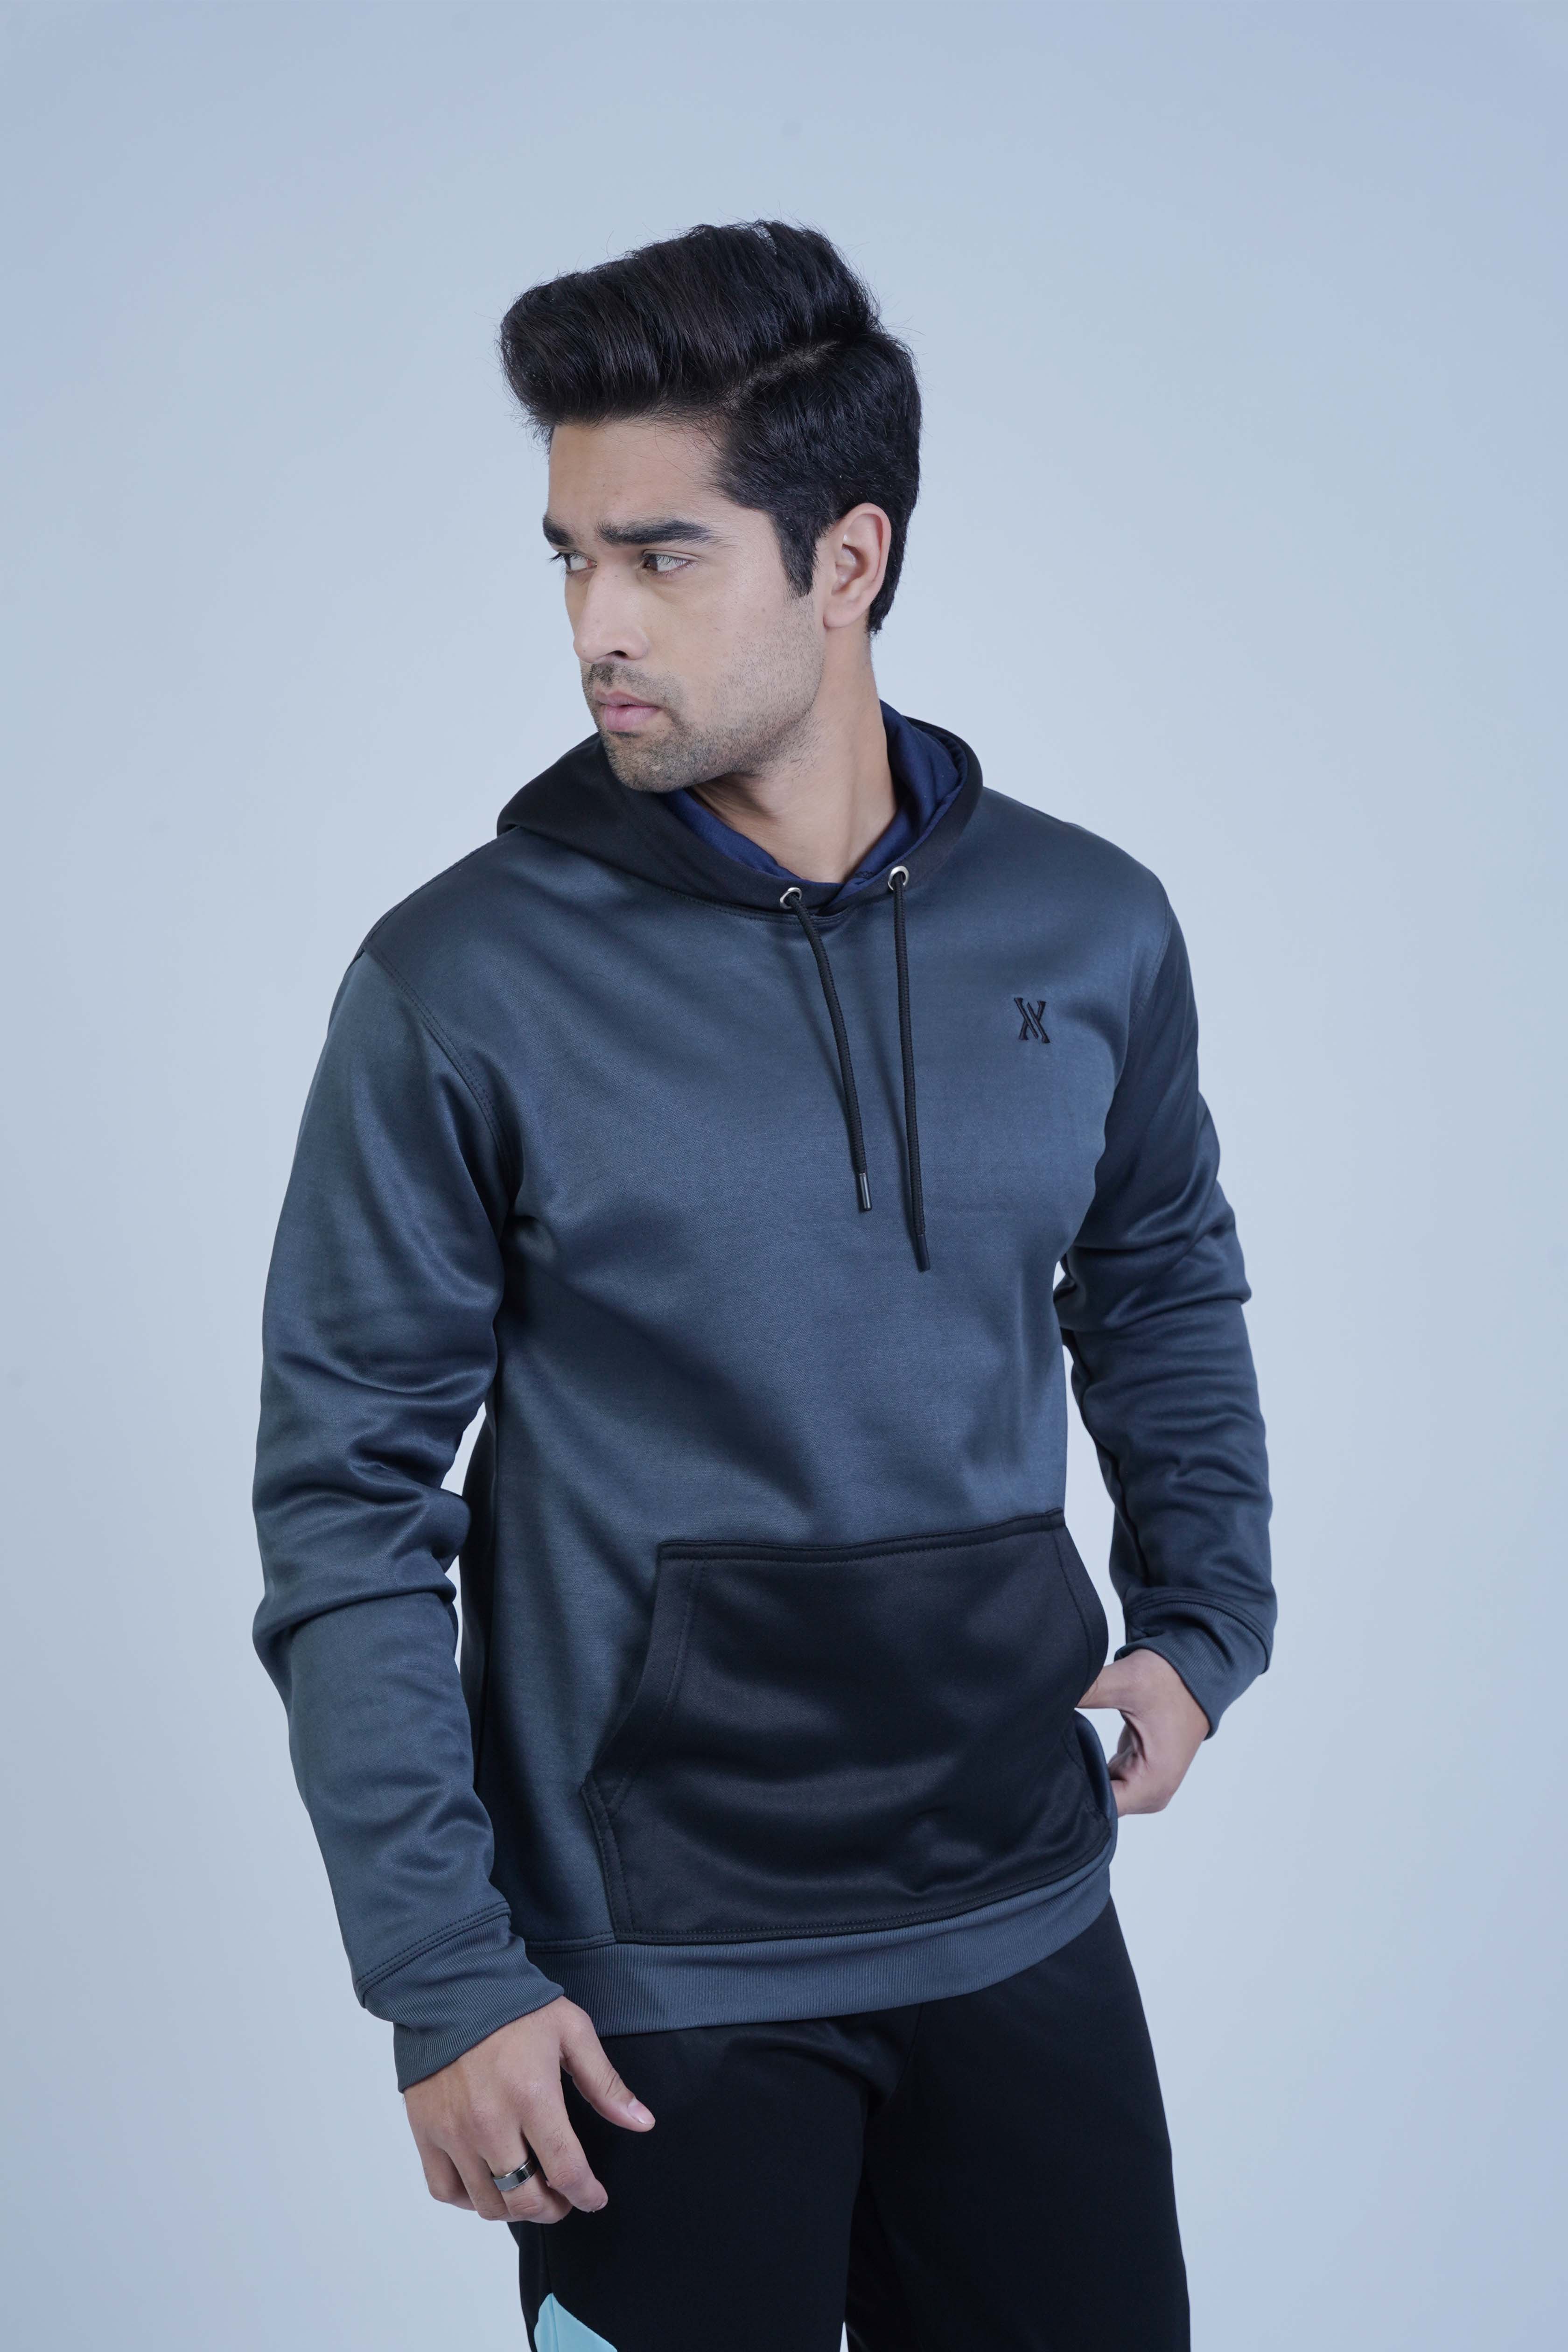 Relaxed Fit Grey Hoodie from The Xea